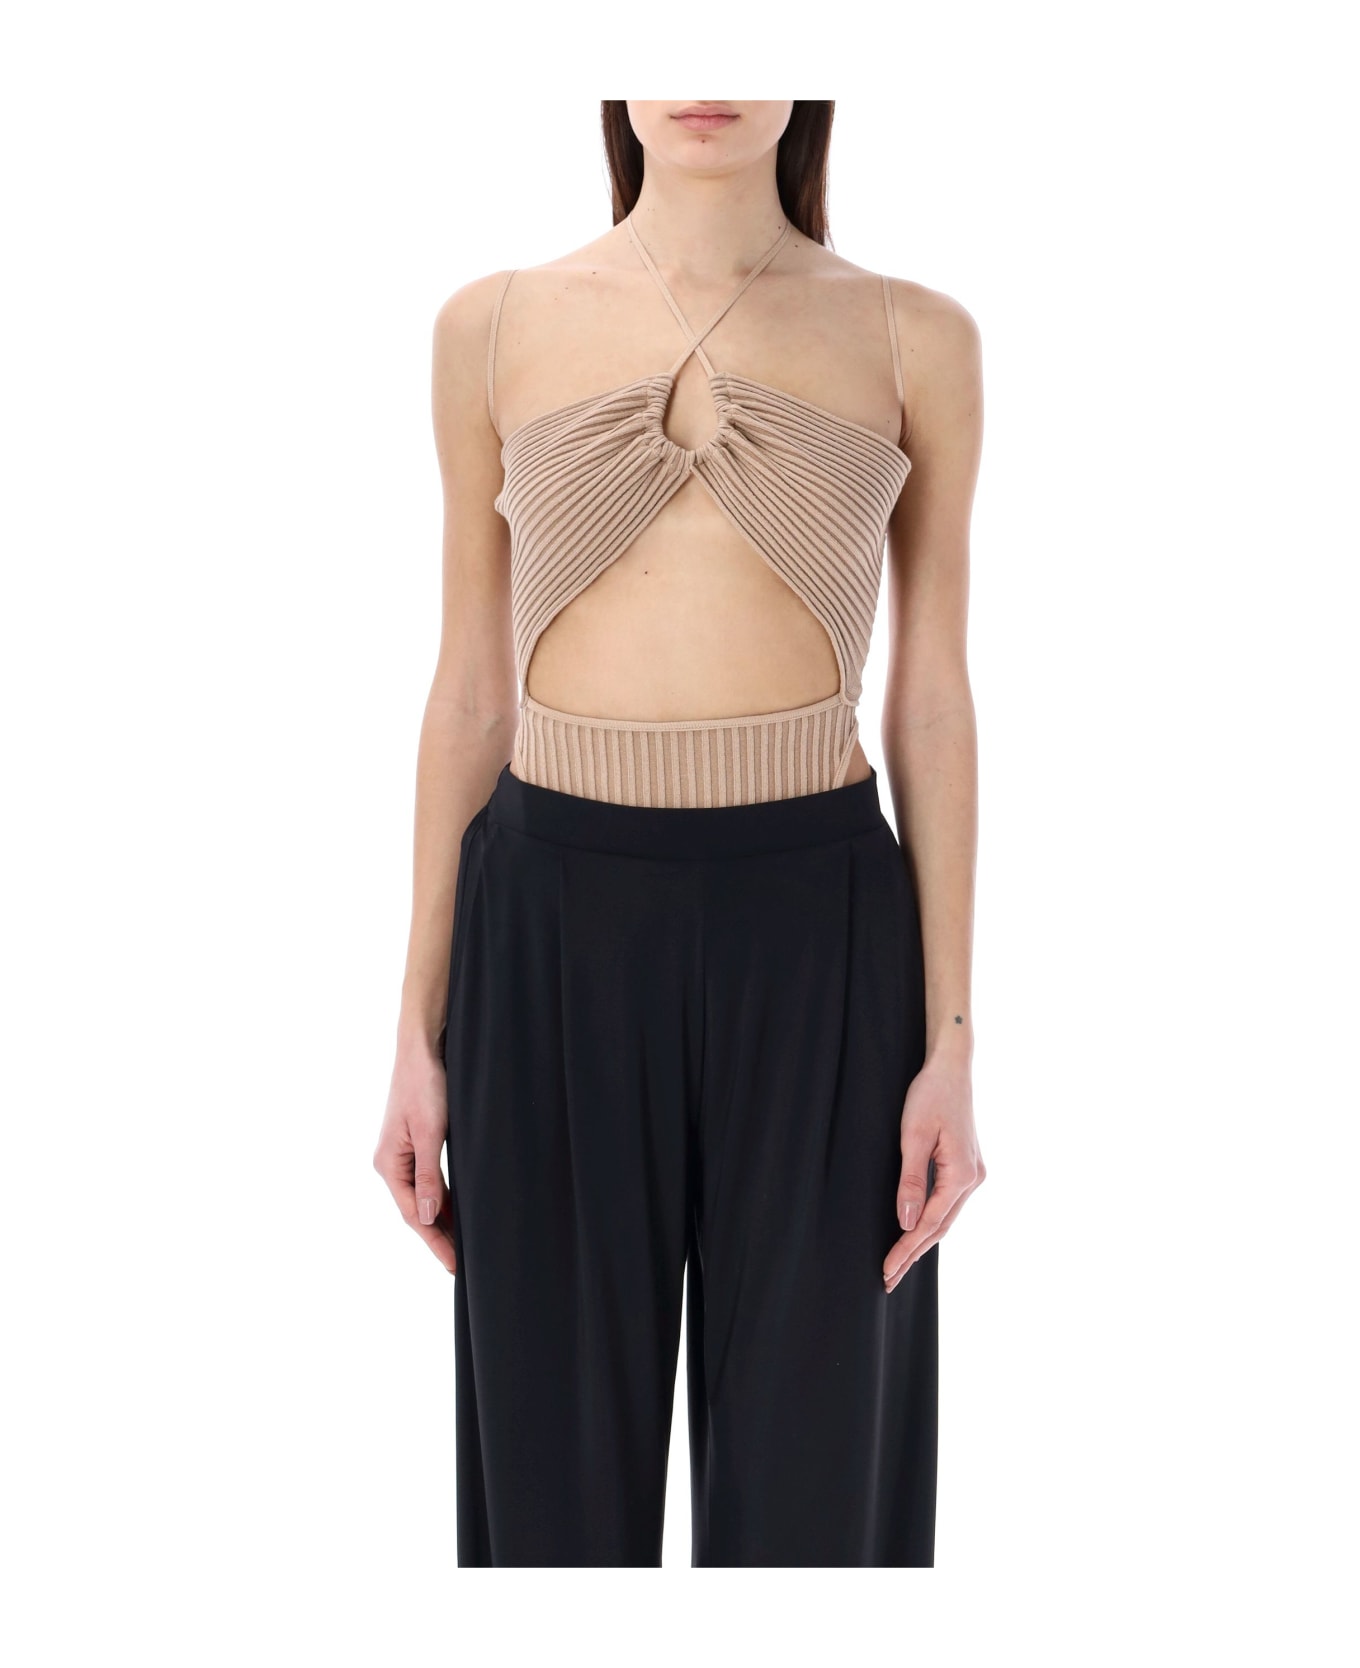 ANDREĀDAMO Ribbed Knit Sleeveless Bodysuit With Cut - NUDE